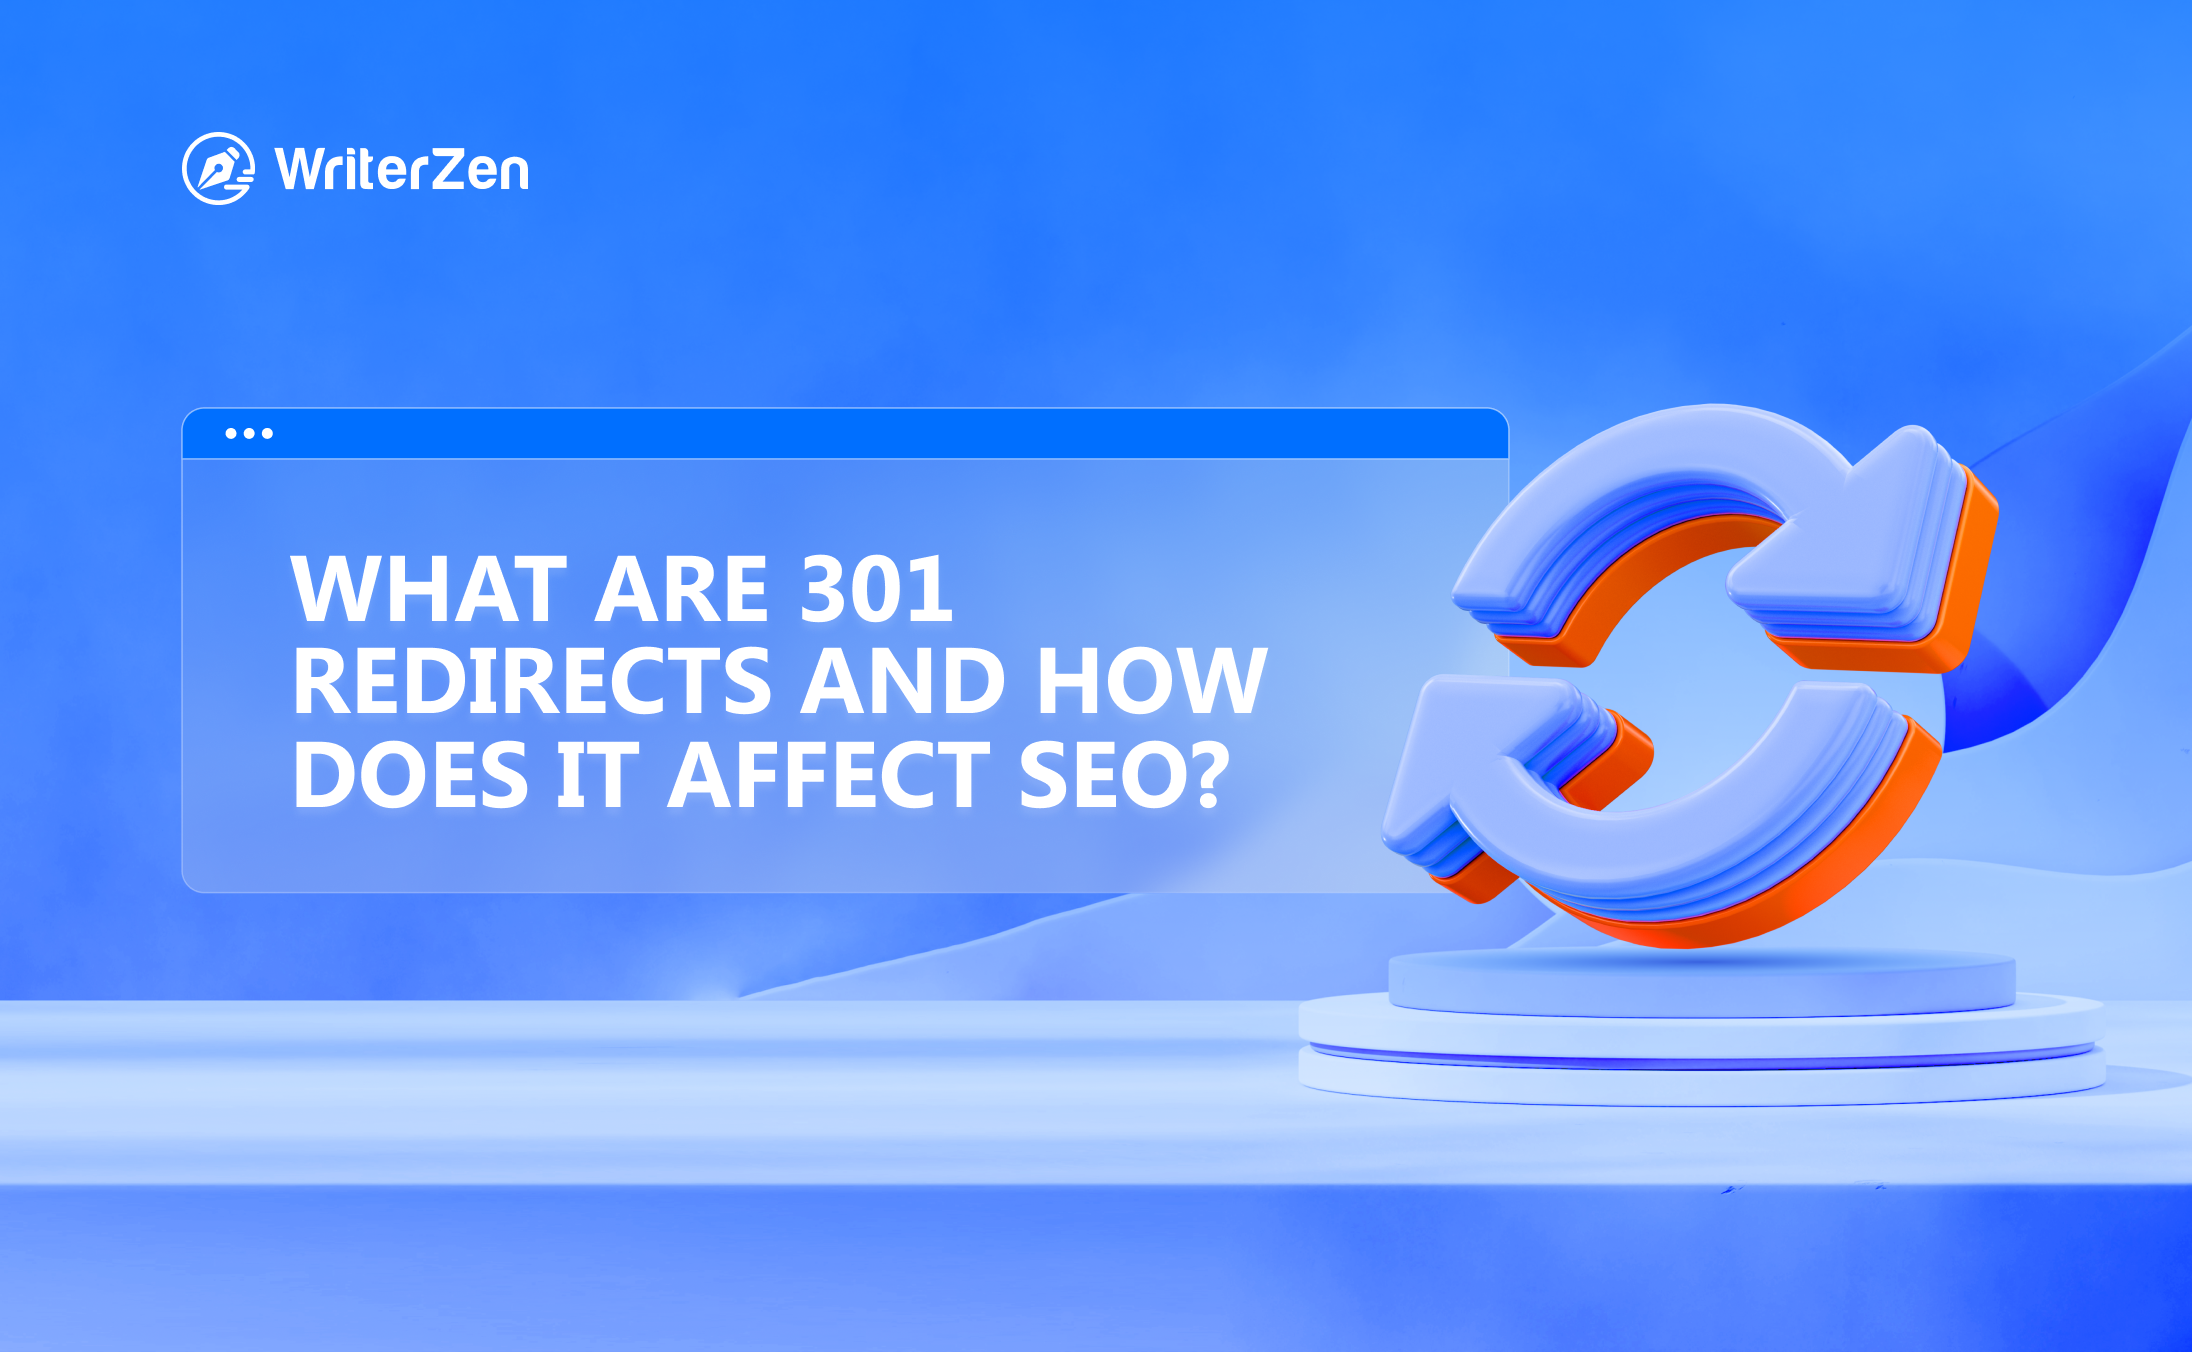 What Are 301 Redirects and How Does It Affect SEO